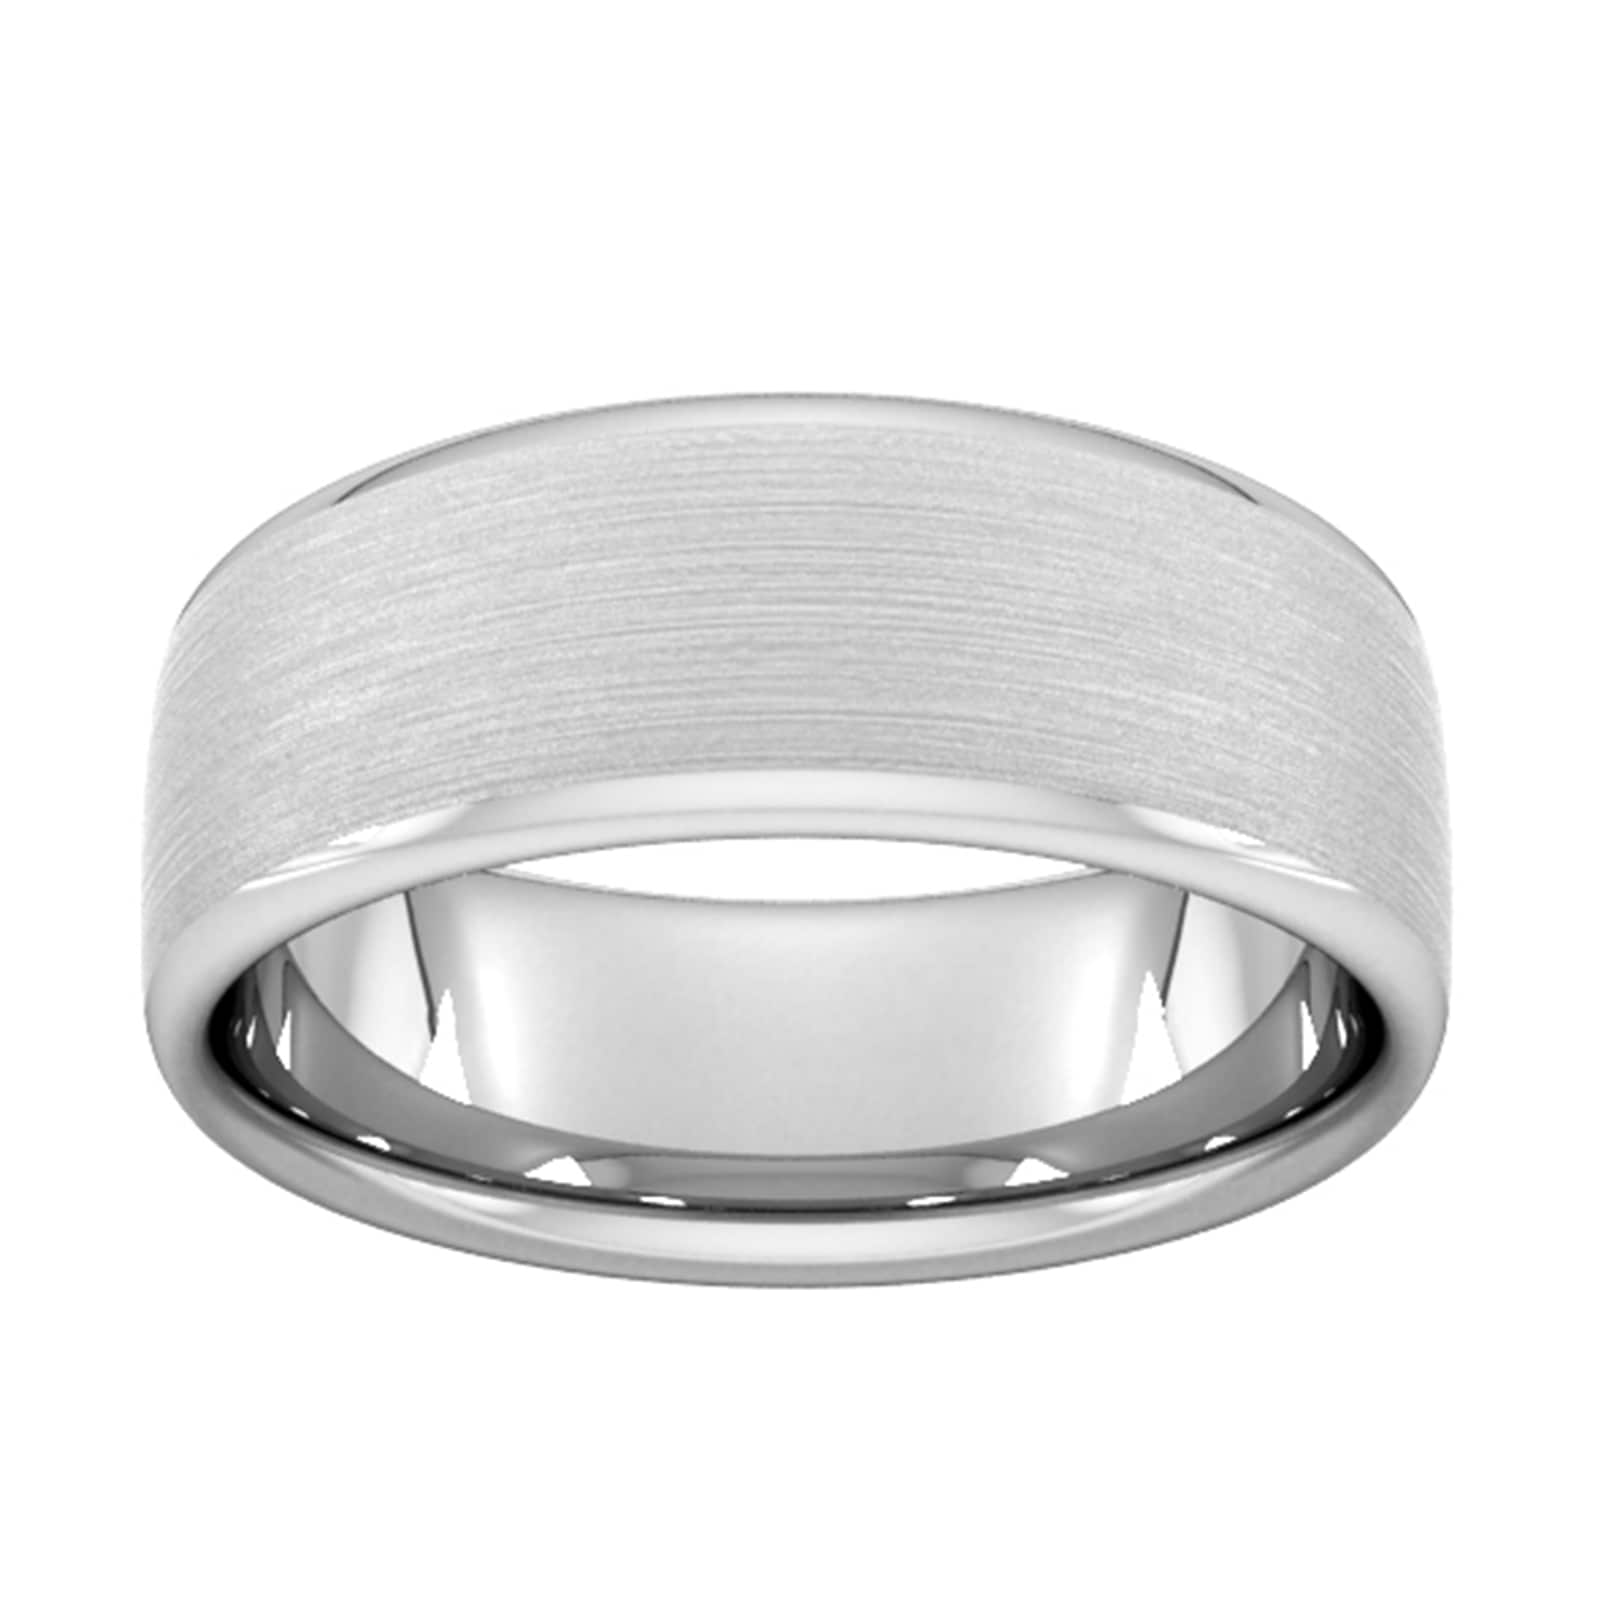 8mm Traditional Court Standard Matt Finished Wedding Ring In 9 Carat White Gold - Ring Size W